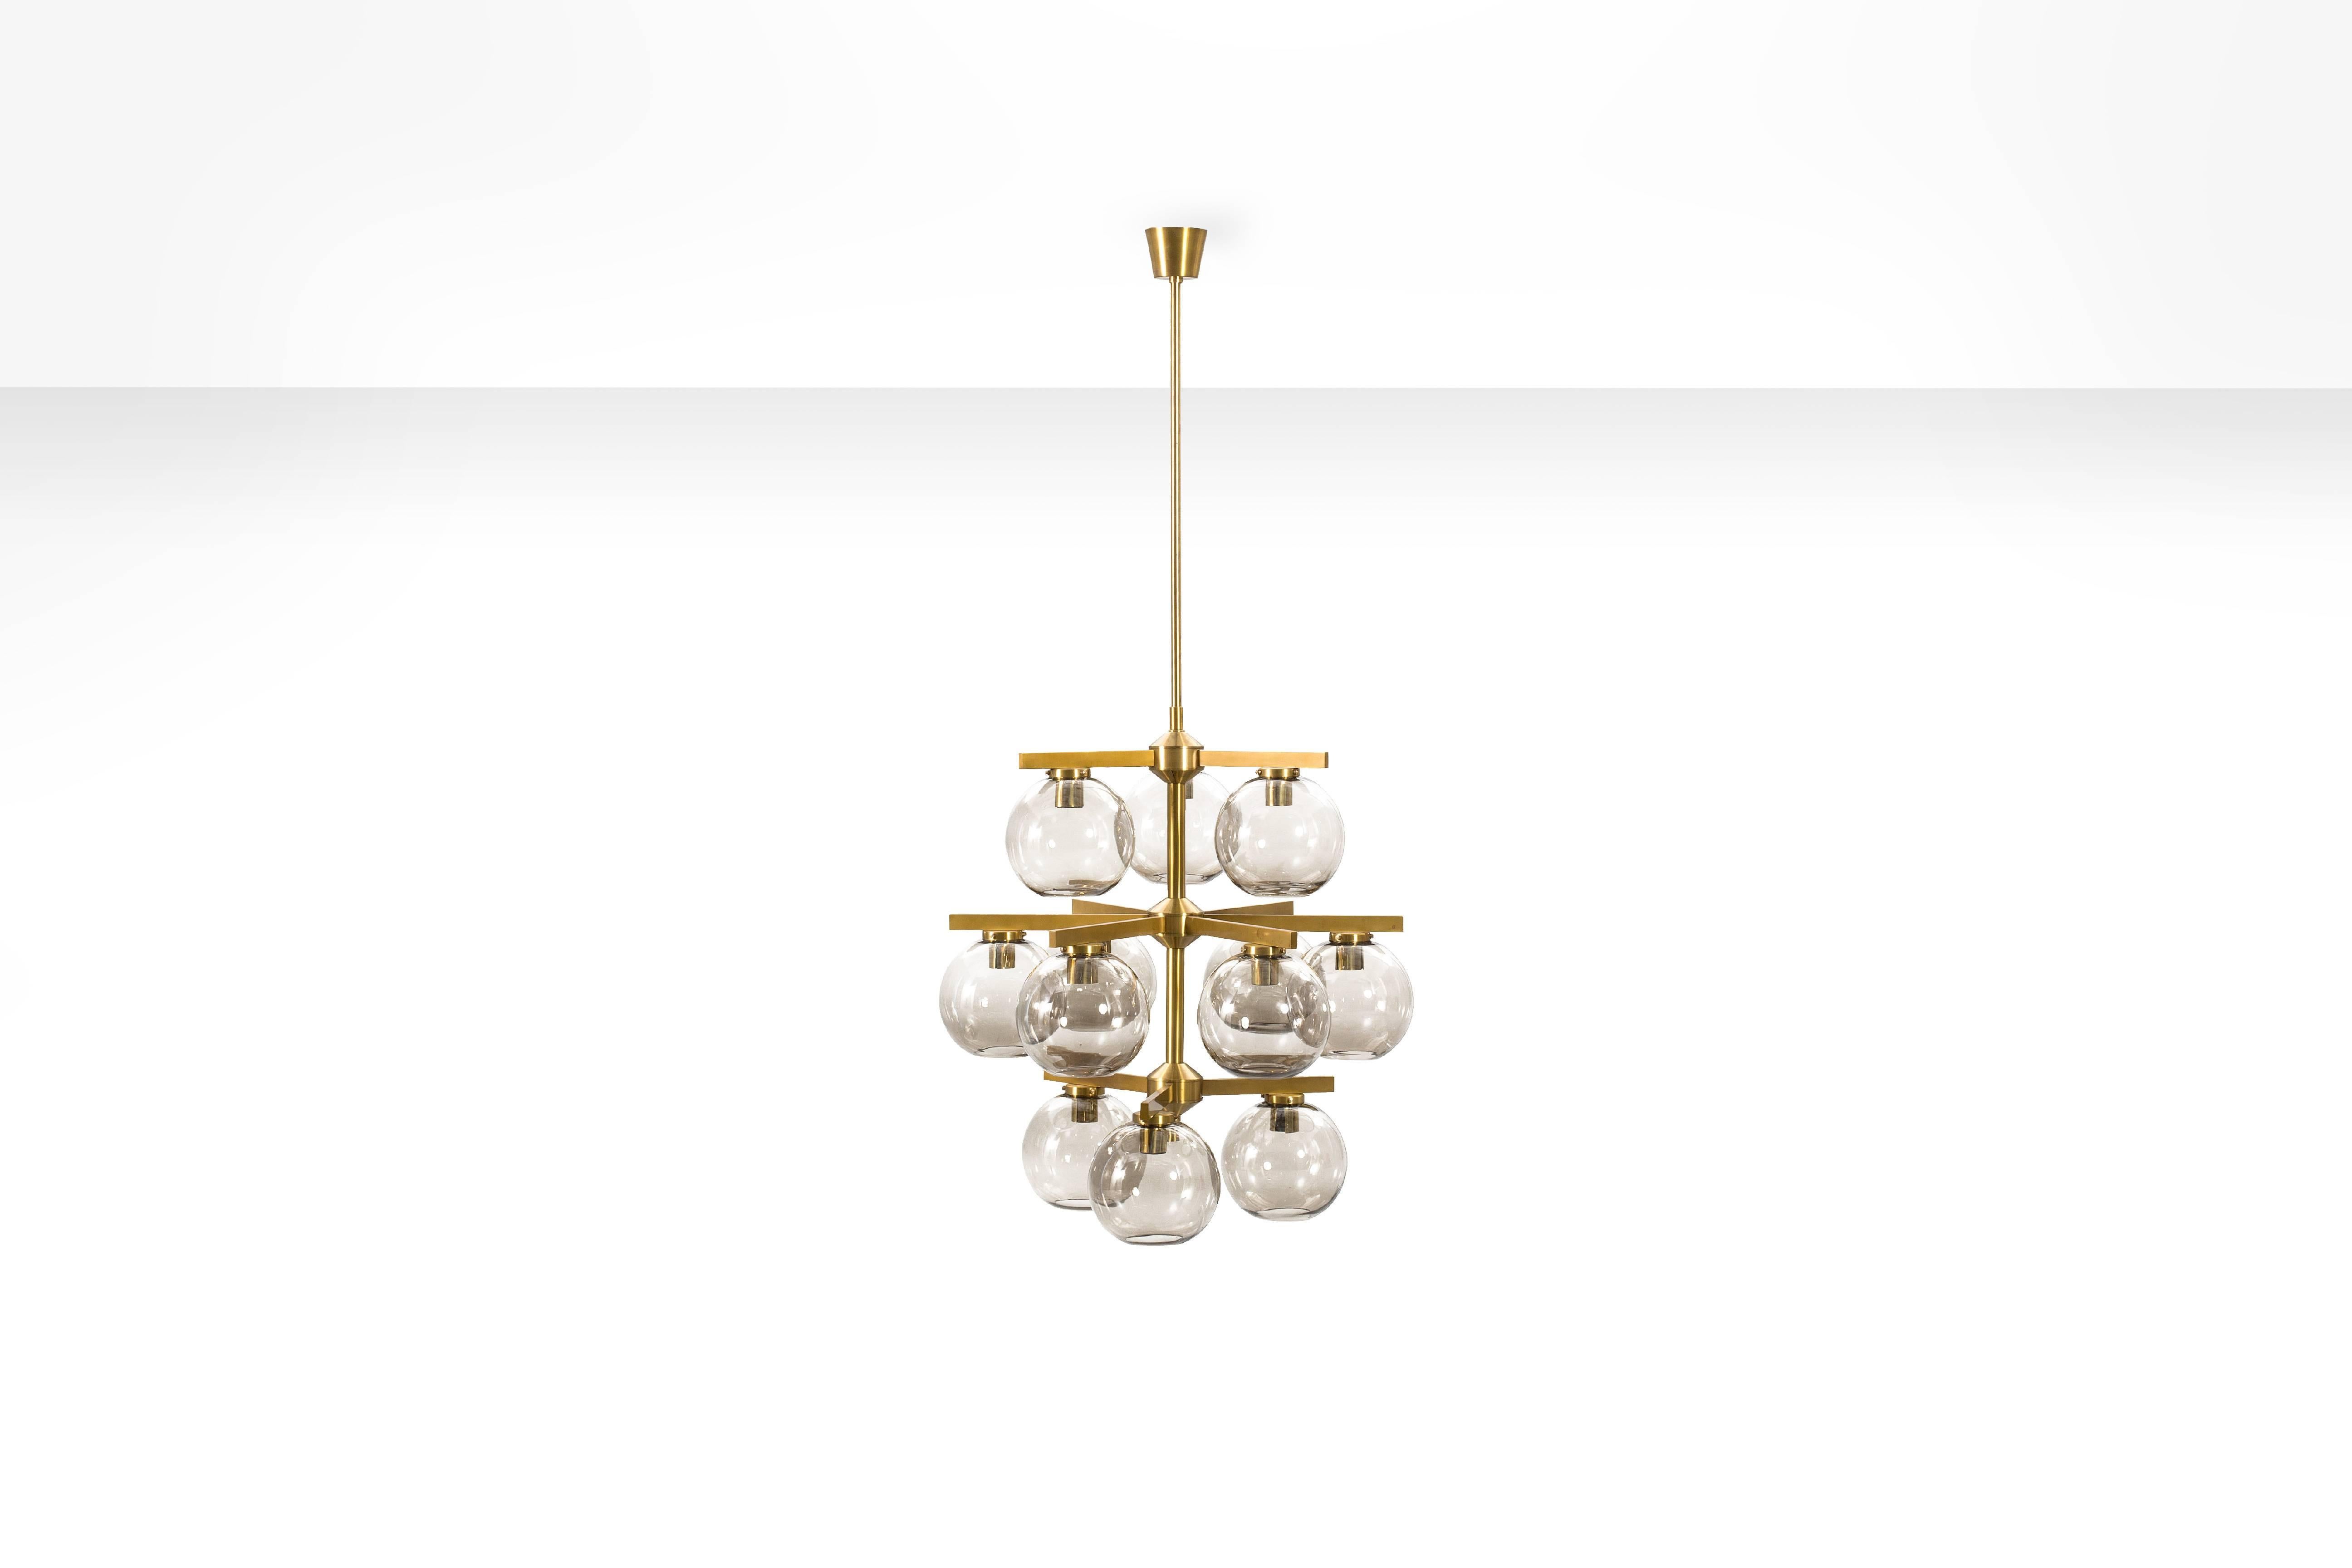 Holger Johansson Chandelier with 12 Smoked Glass Shades for Westal, Sweden, 1960s

This marvellous chandelier by Holger Johansson has a brass frame and 12 smoked glass shades and has all the characteristics Johansson was famous for; It's elegant,